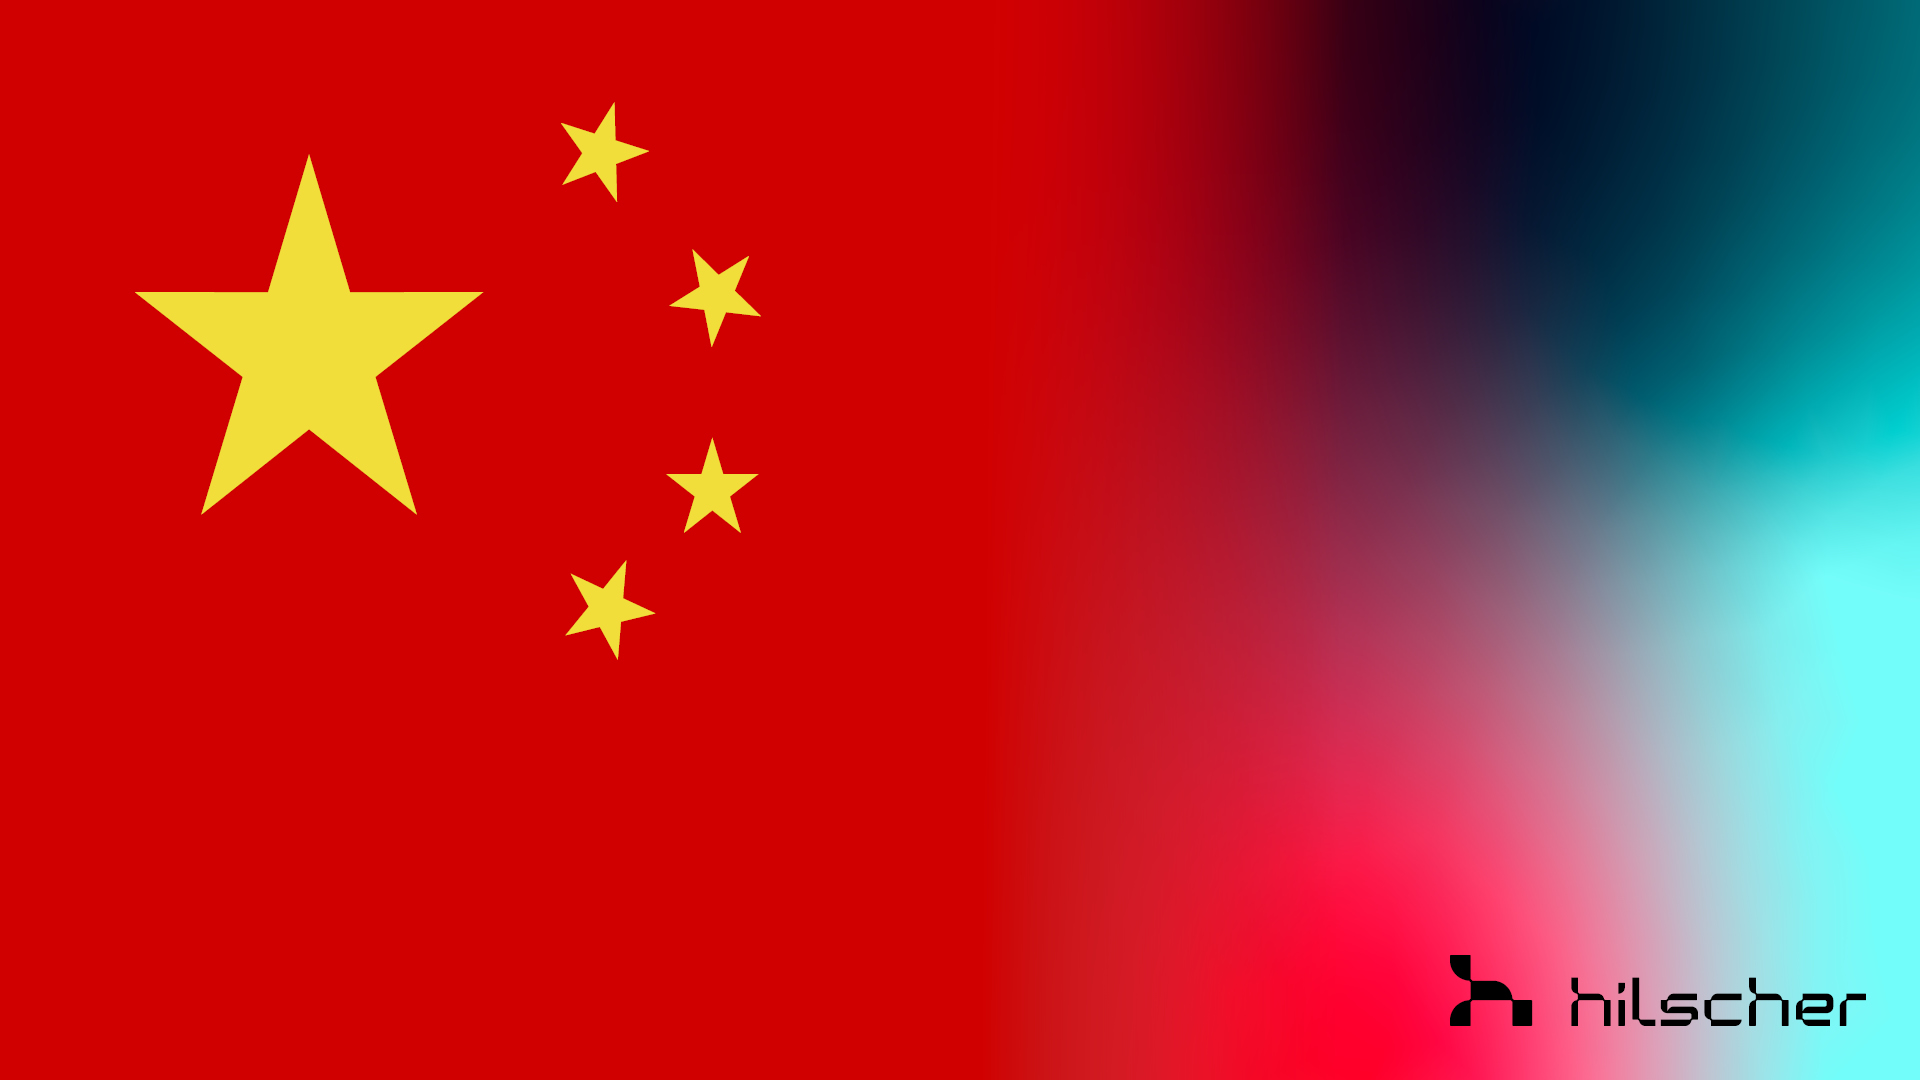 The flag of China. On the right side of the picture is a fade to a colorful space, accounting for nearly a quarter of the image.